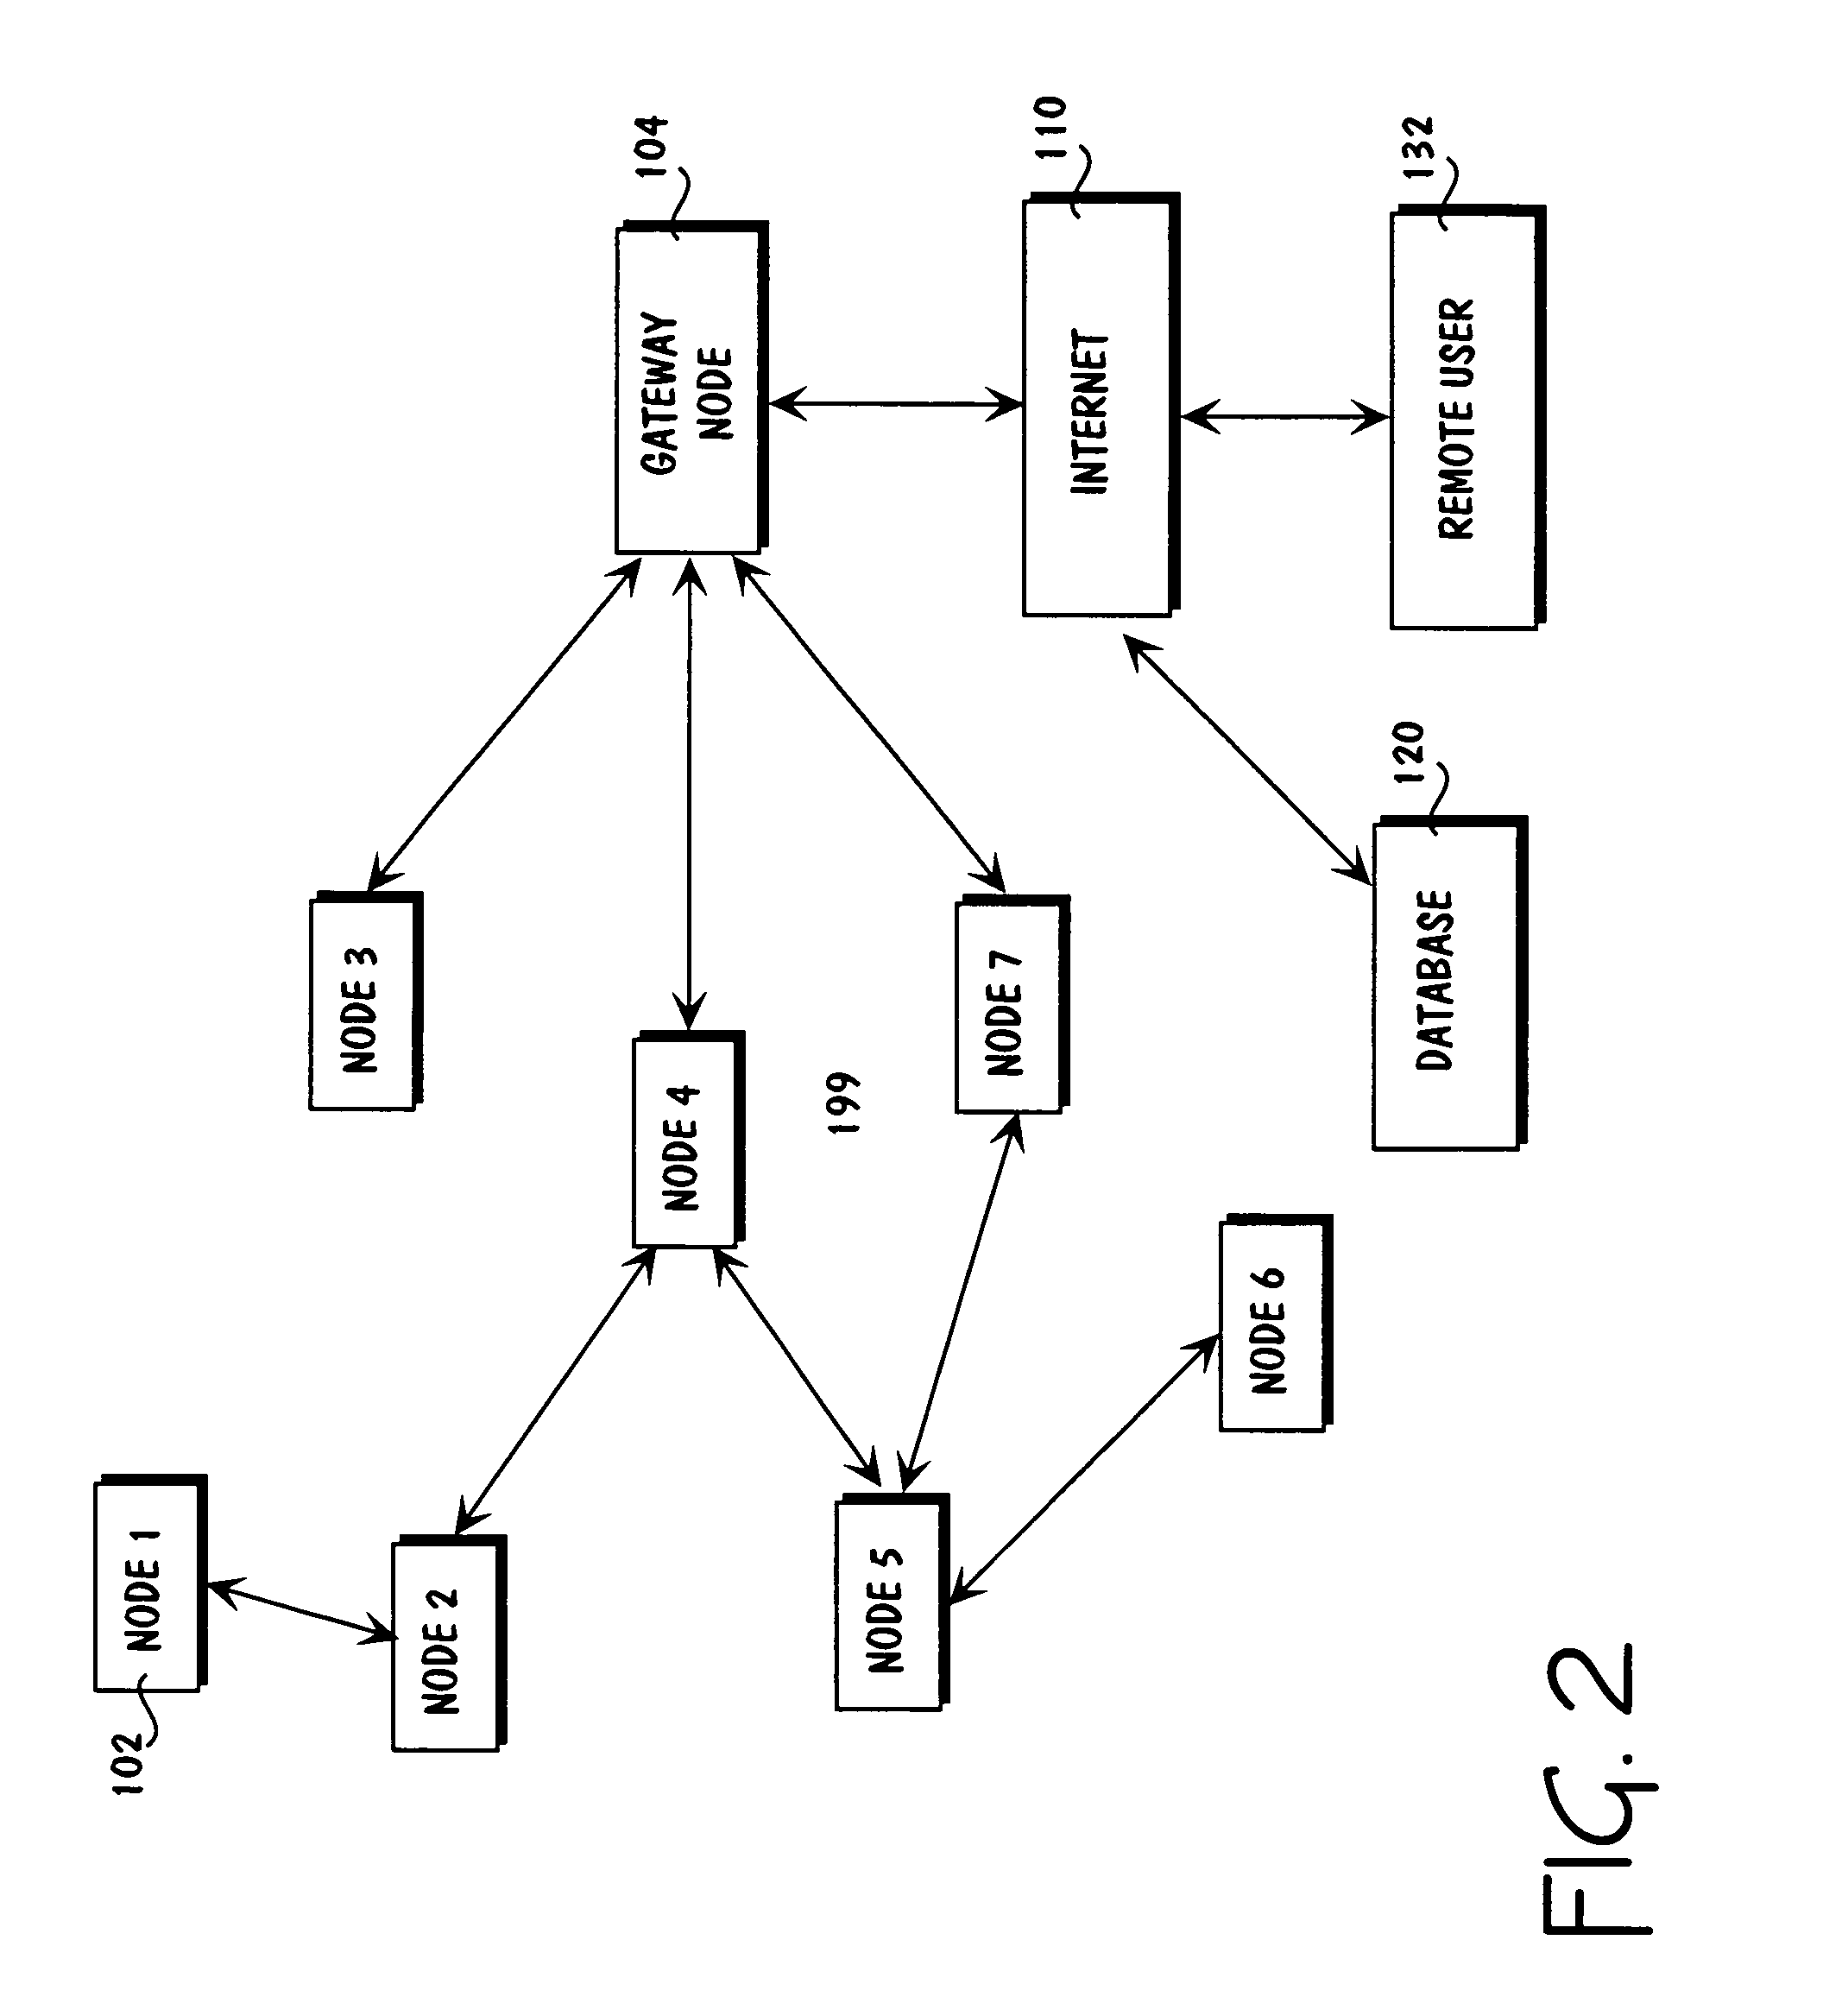 Apparatus for vehicle internetworks